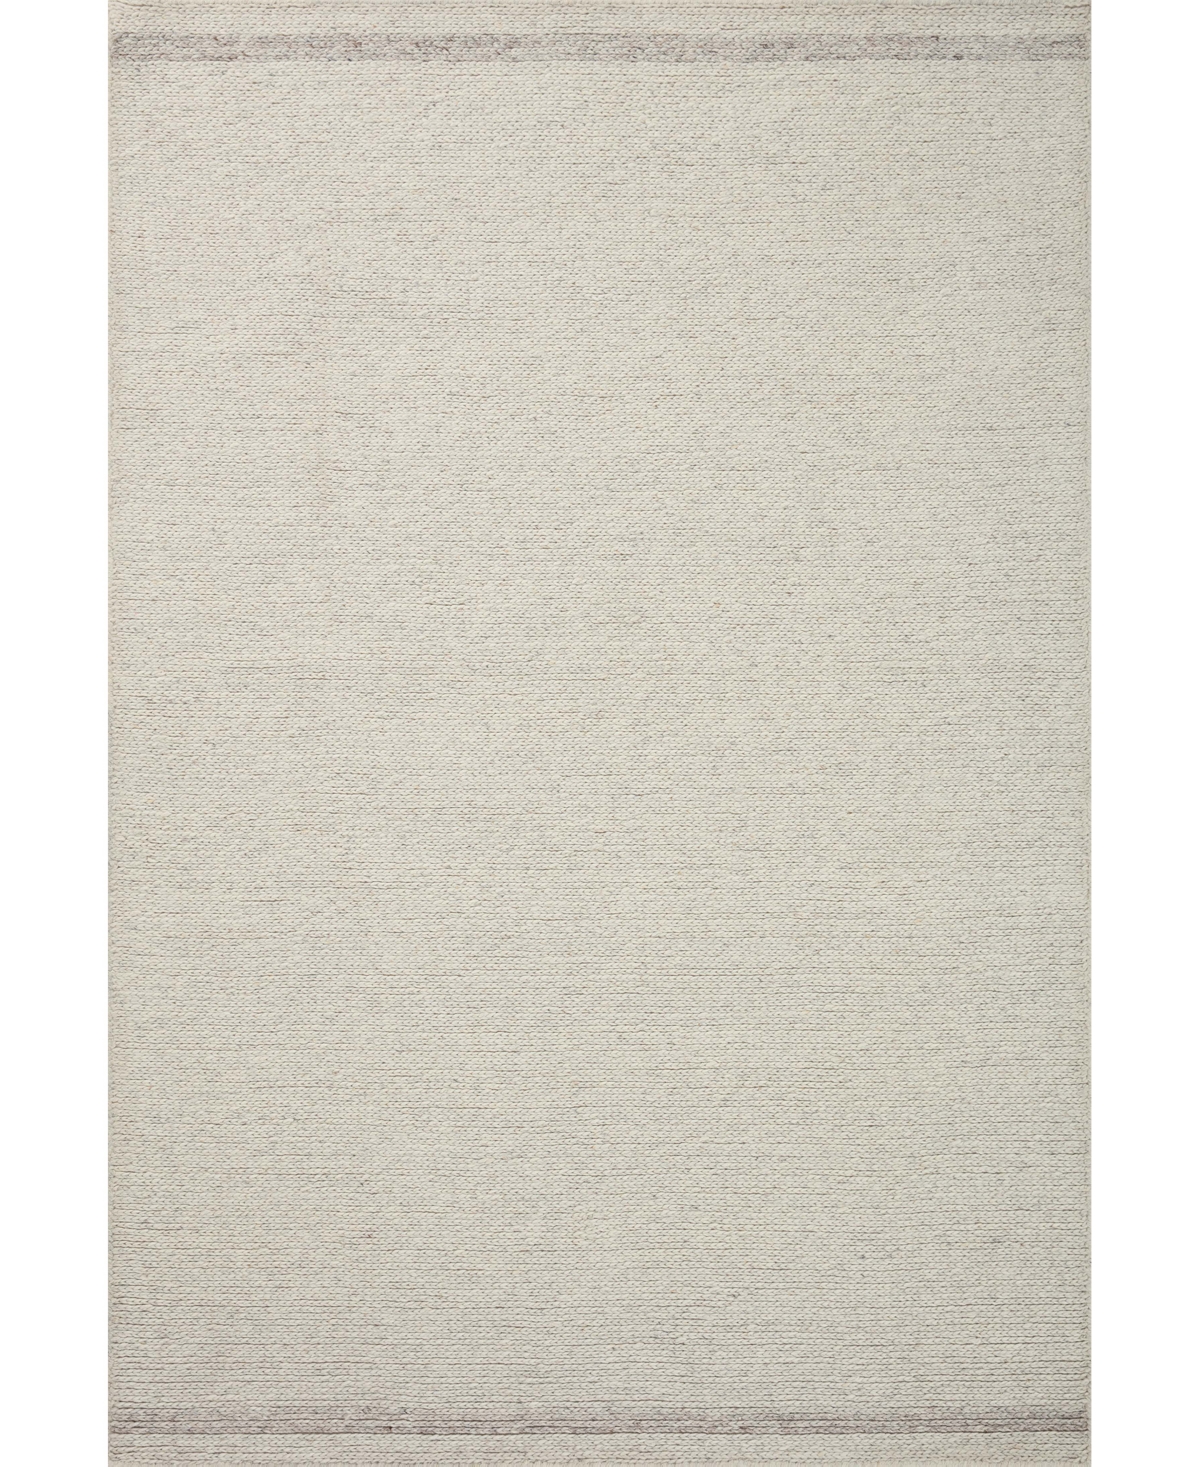 Magnolia Home By Joanna Gaines X Loloi Ashby Ash-02 5' X 7'6" Area Rug In Mist